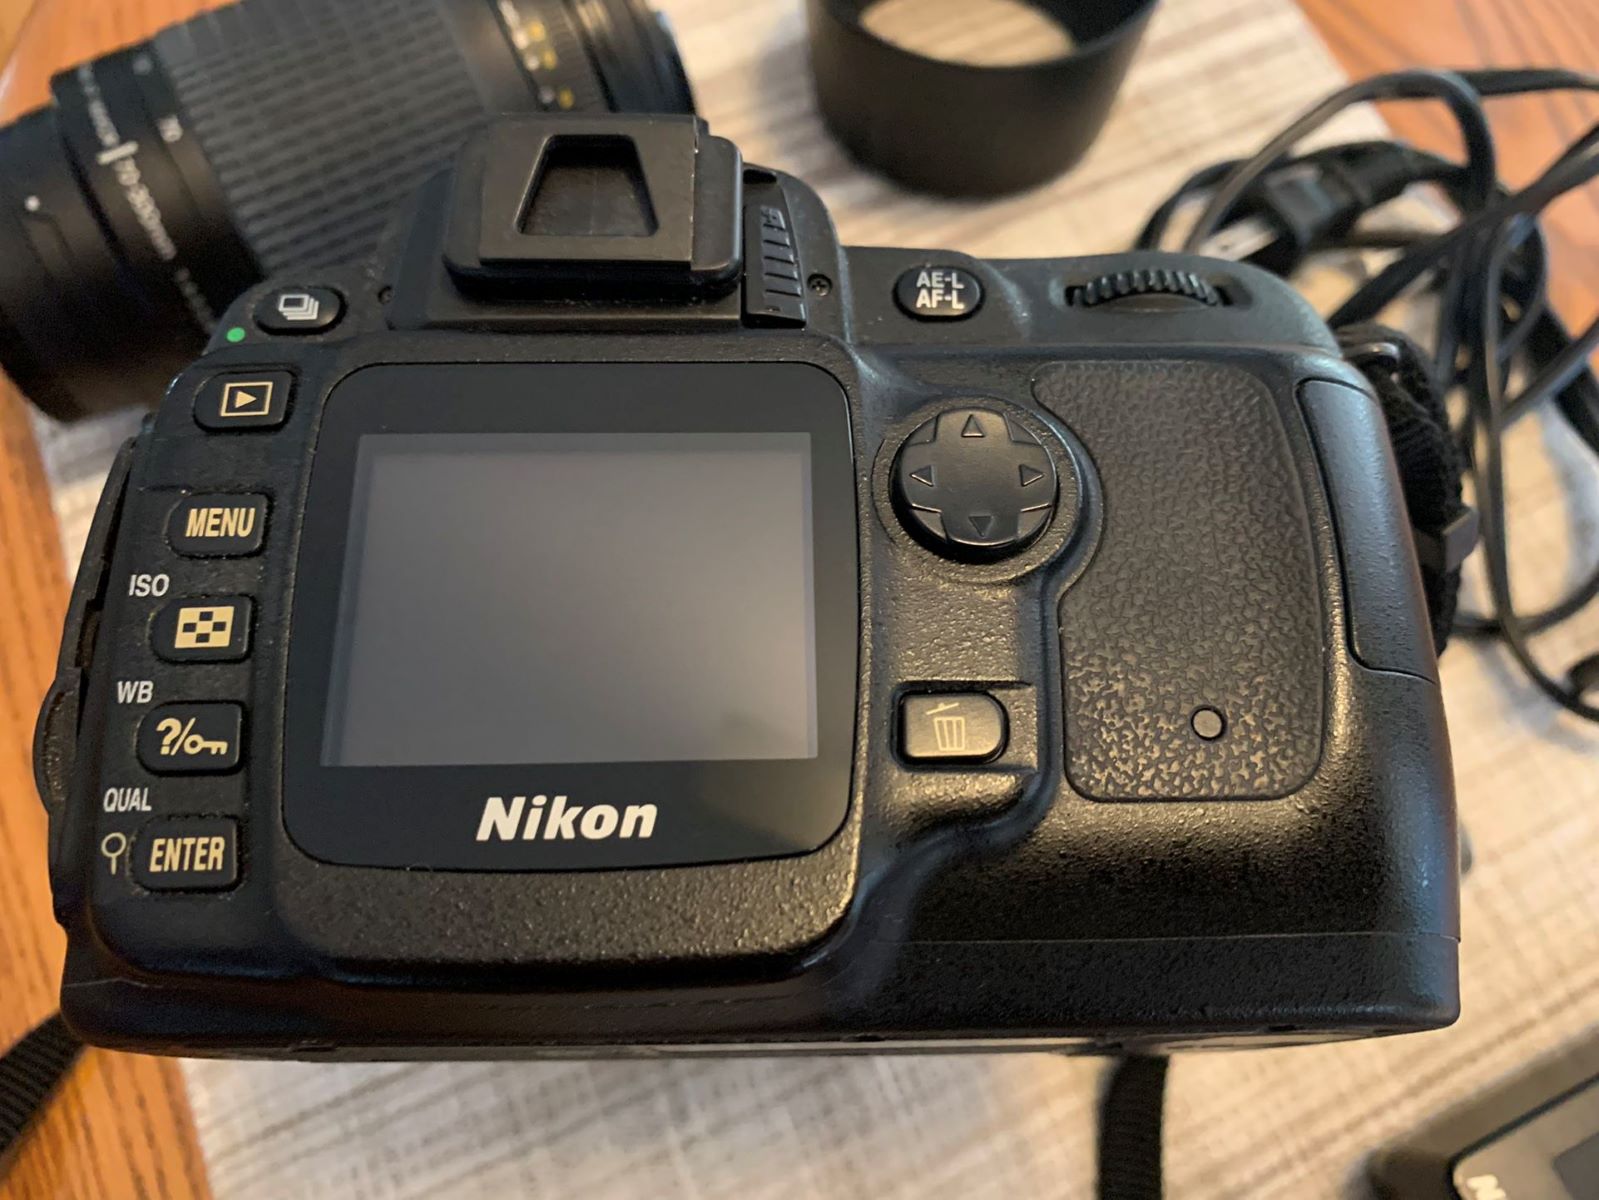 what-kind-of-sd-card-do-i-use-in-a-nikon-d50-dslr-camera-with-quantaray-70-300mm